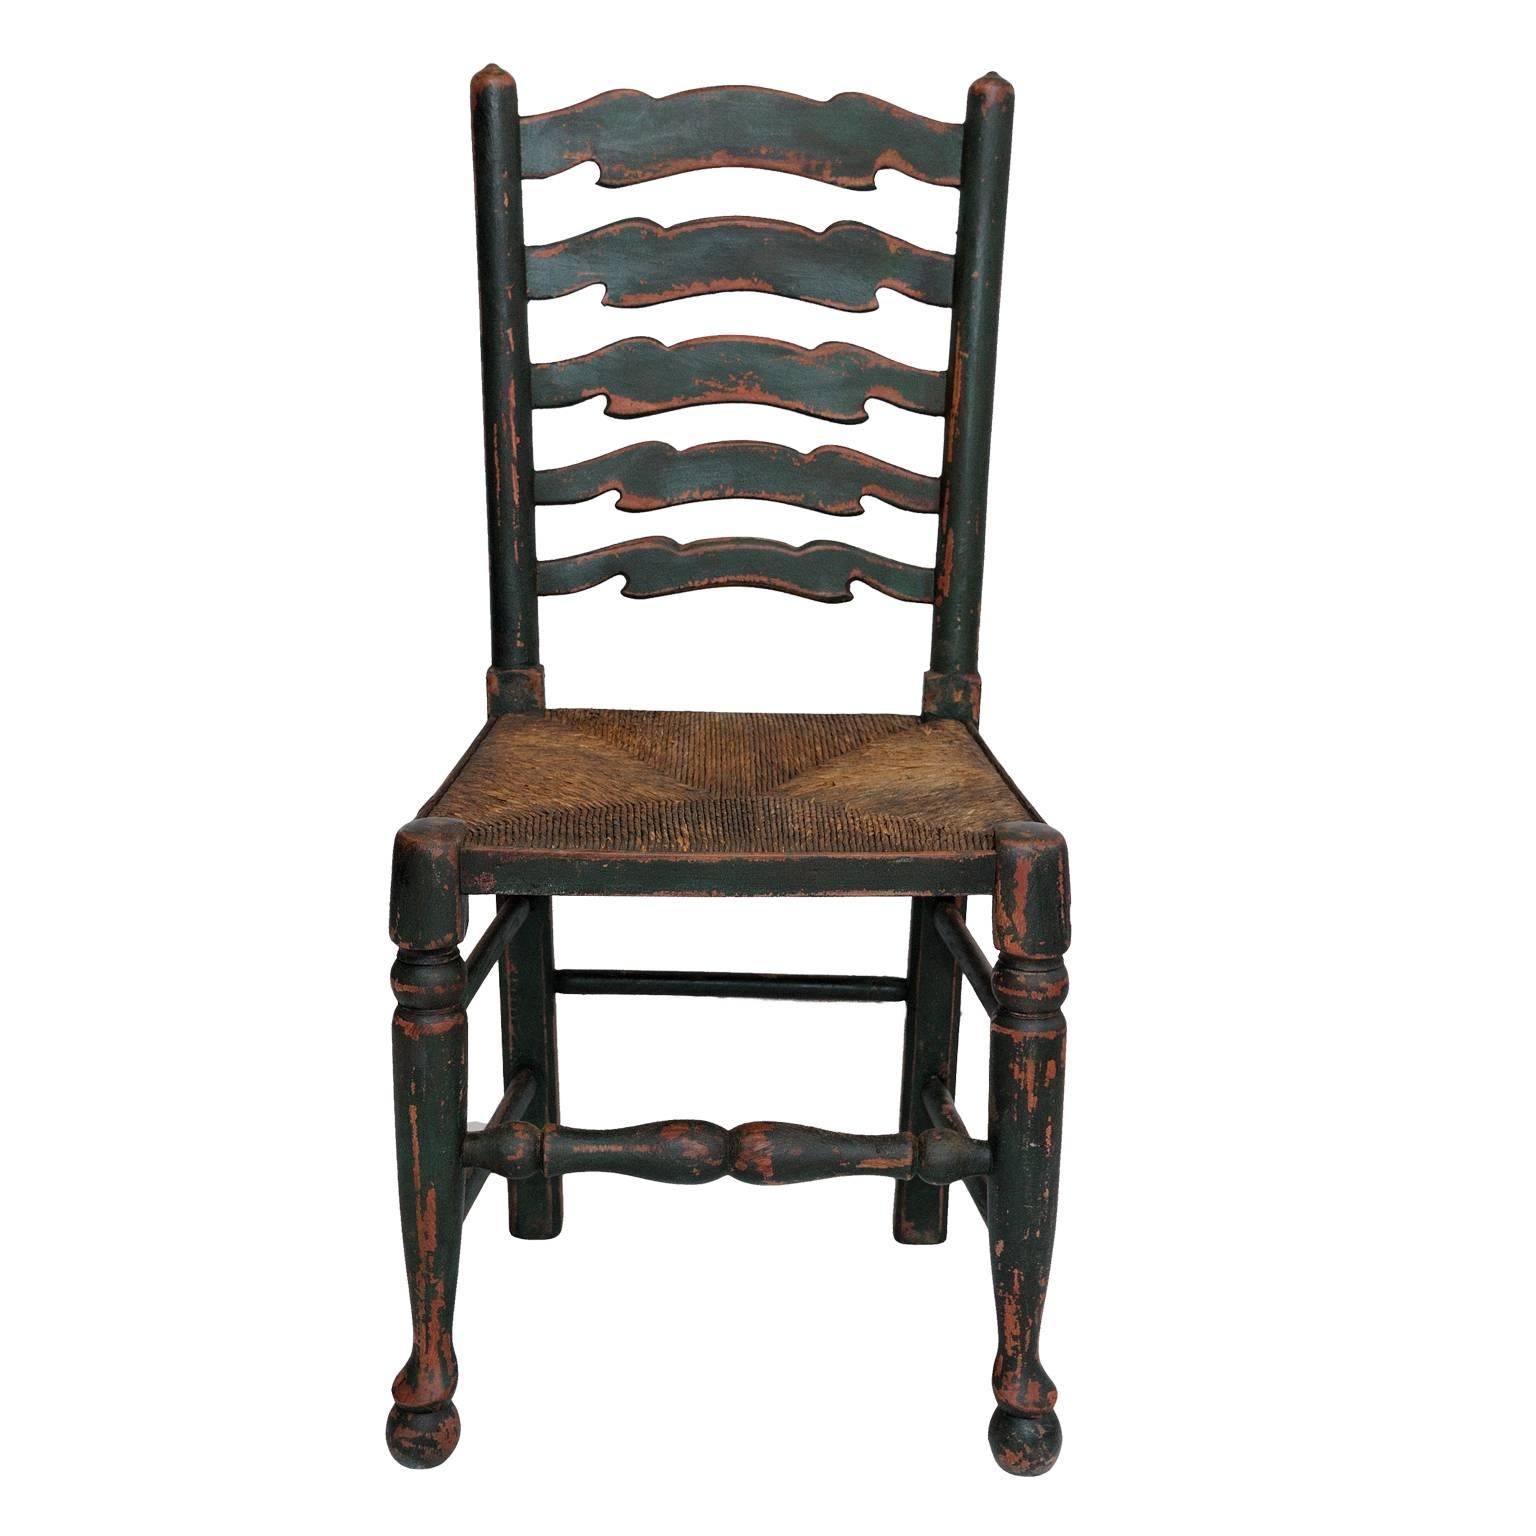 This is a lovely set of six English oak painted mid-19th century ladder back chairs with rush seats. All the chairs are in very good usable condition, circa 1860.